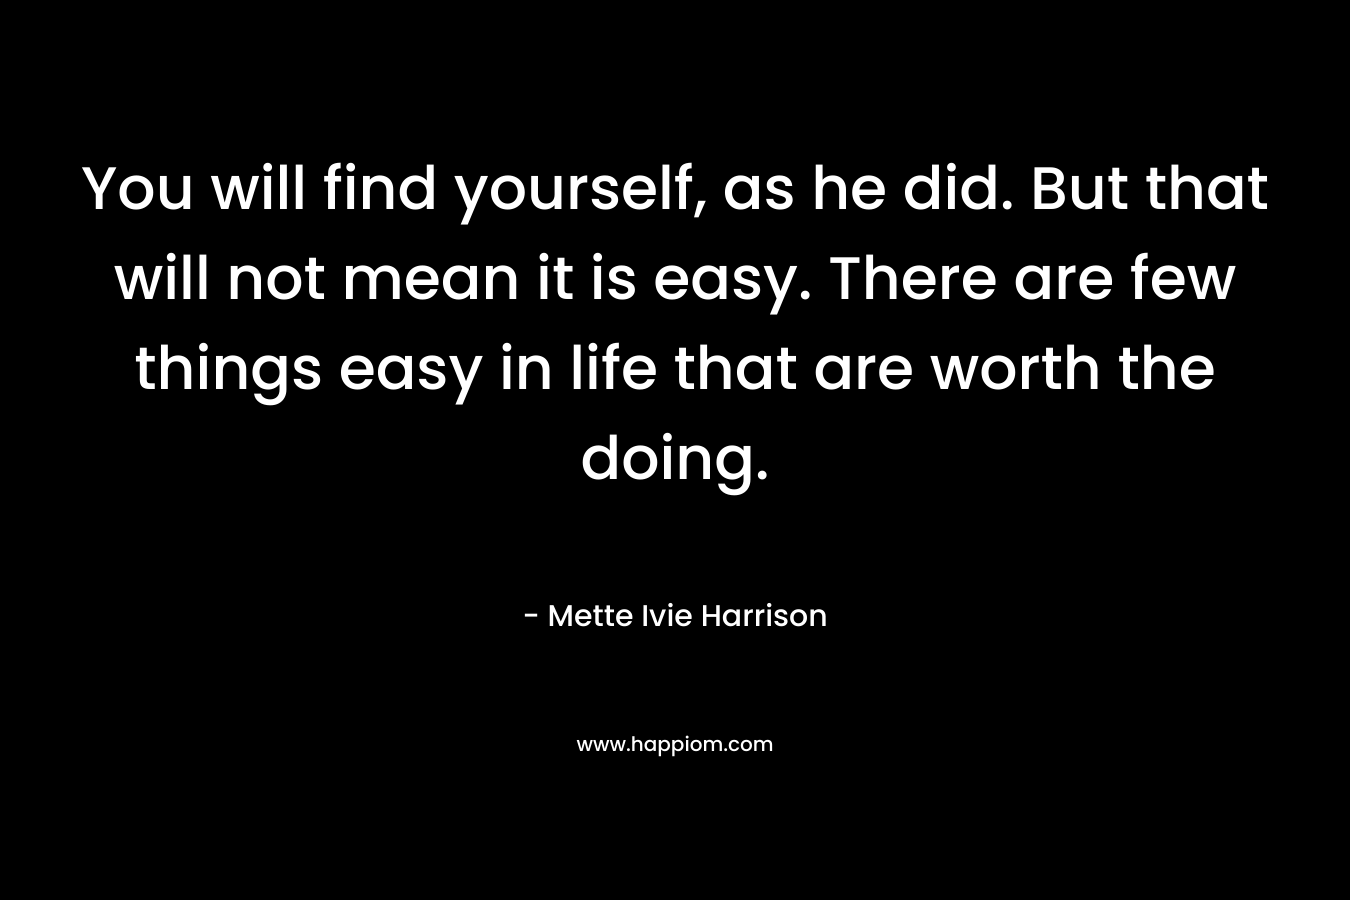 You will find yourself, as he did. But that will not mean it is easy. There are few things easy in life that are worth the doing.